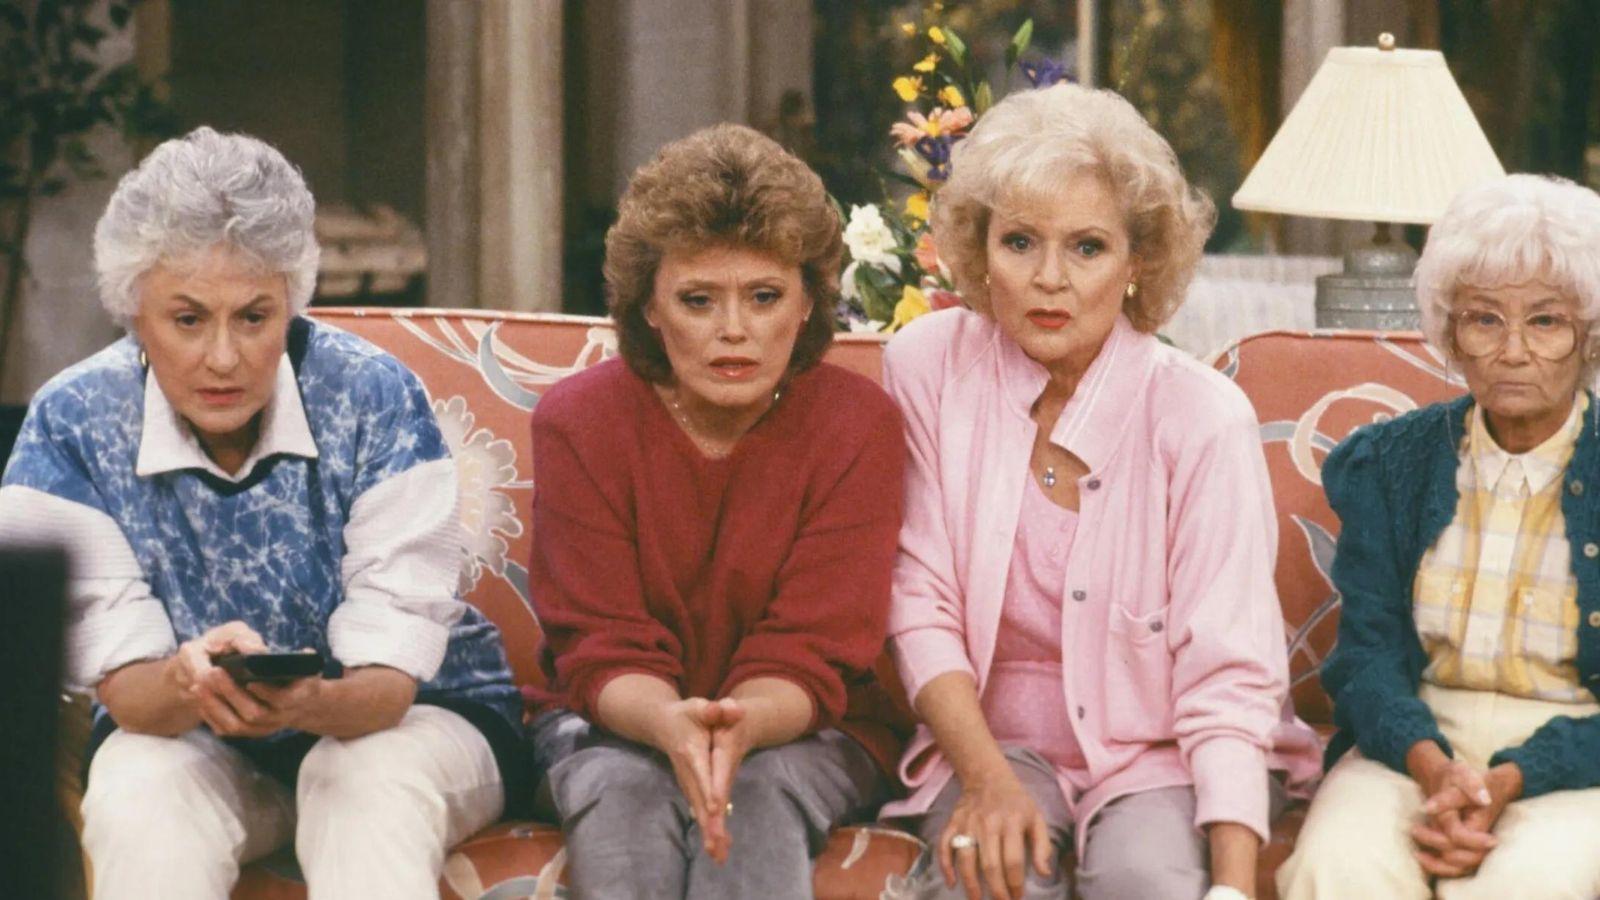 The cast of The Golden Girls